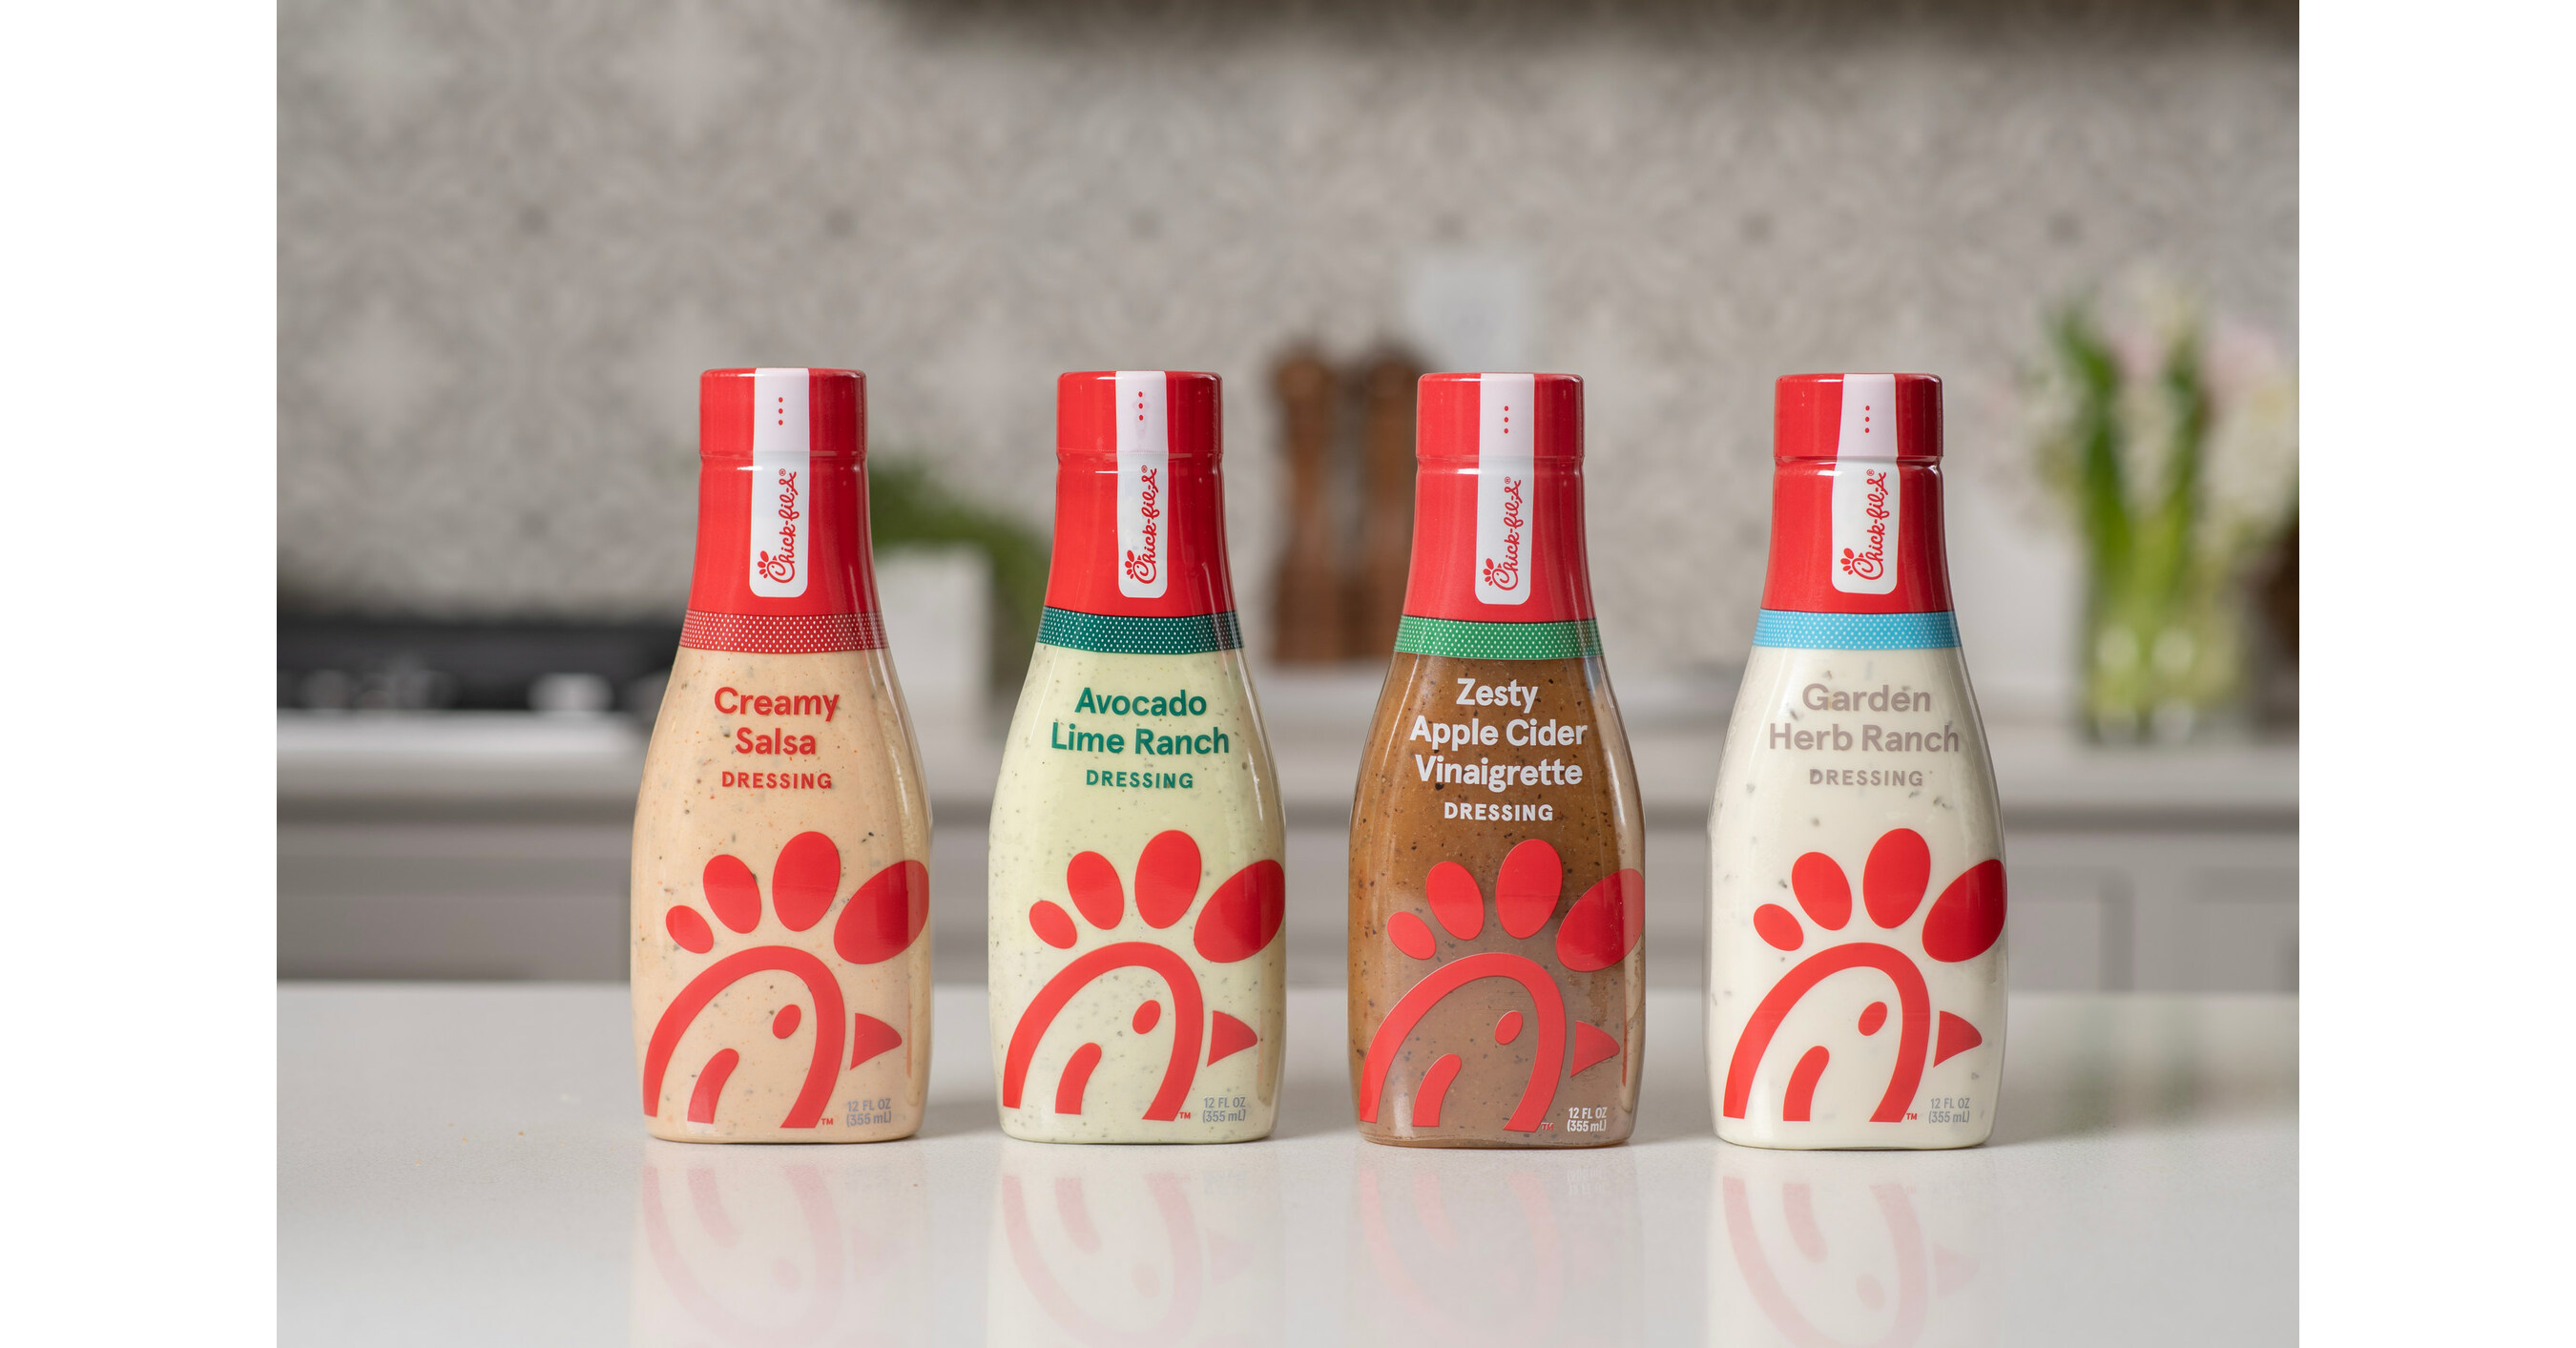 Chick-fil-A Will Be Releasing Gift Packs Full Of Its Sauces